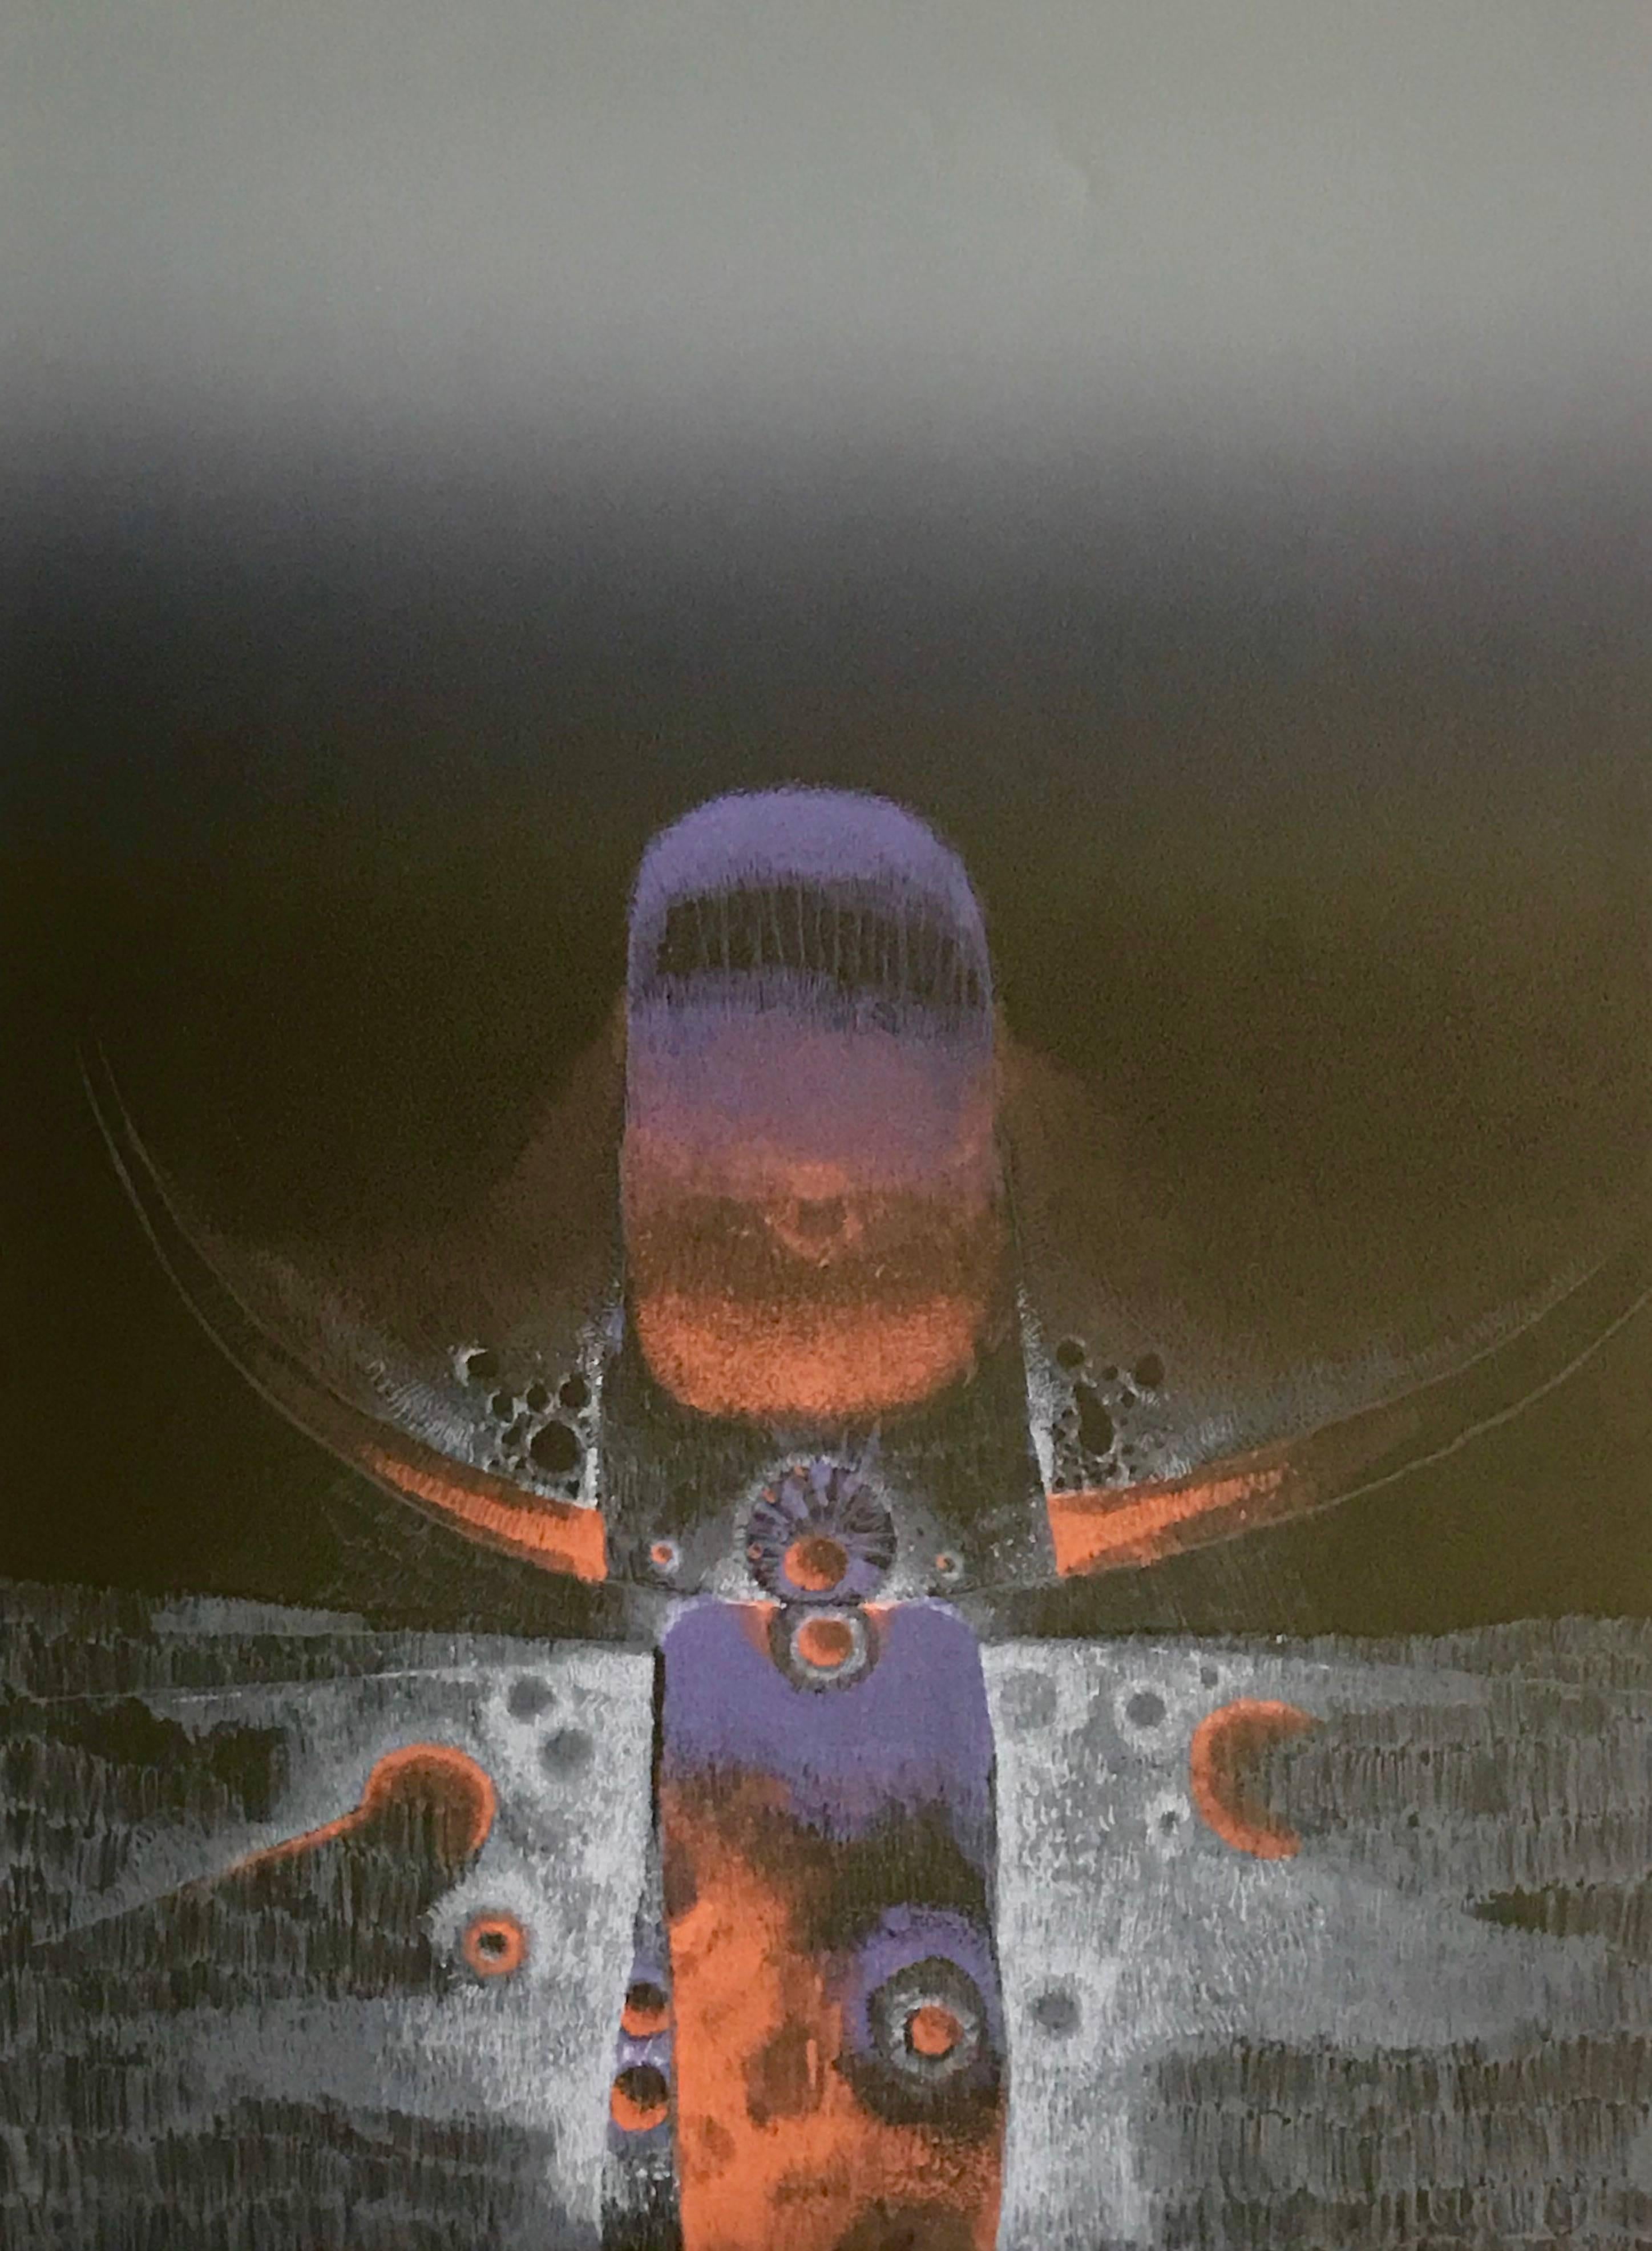 Arun Bose Abstract Print - SPIRIT TOTEM Signed Lithograph, Surreal Abstract, South Asian, Purple Red Black 